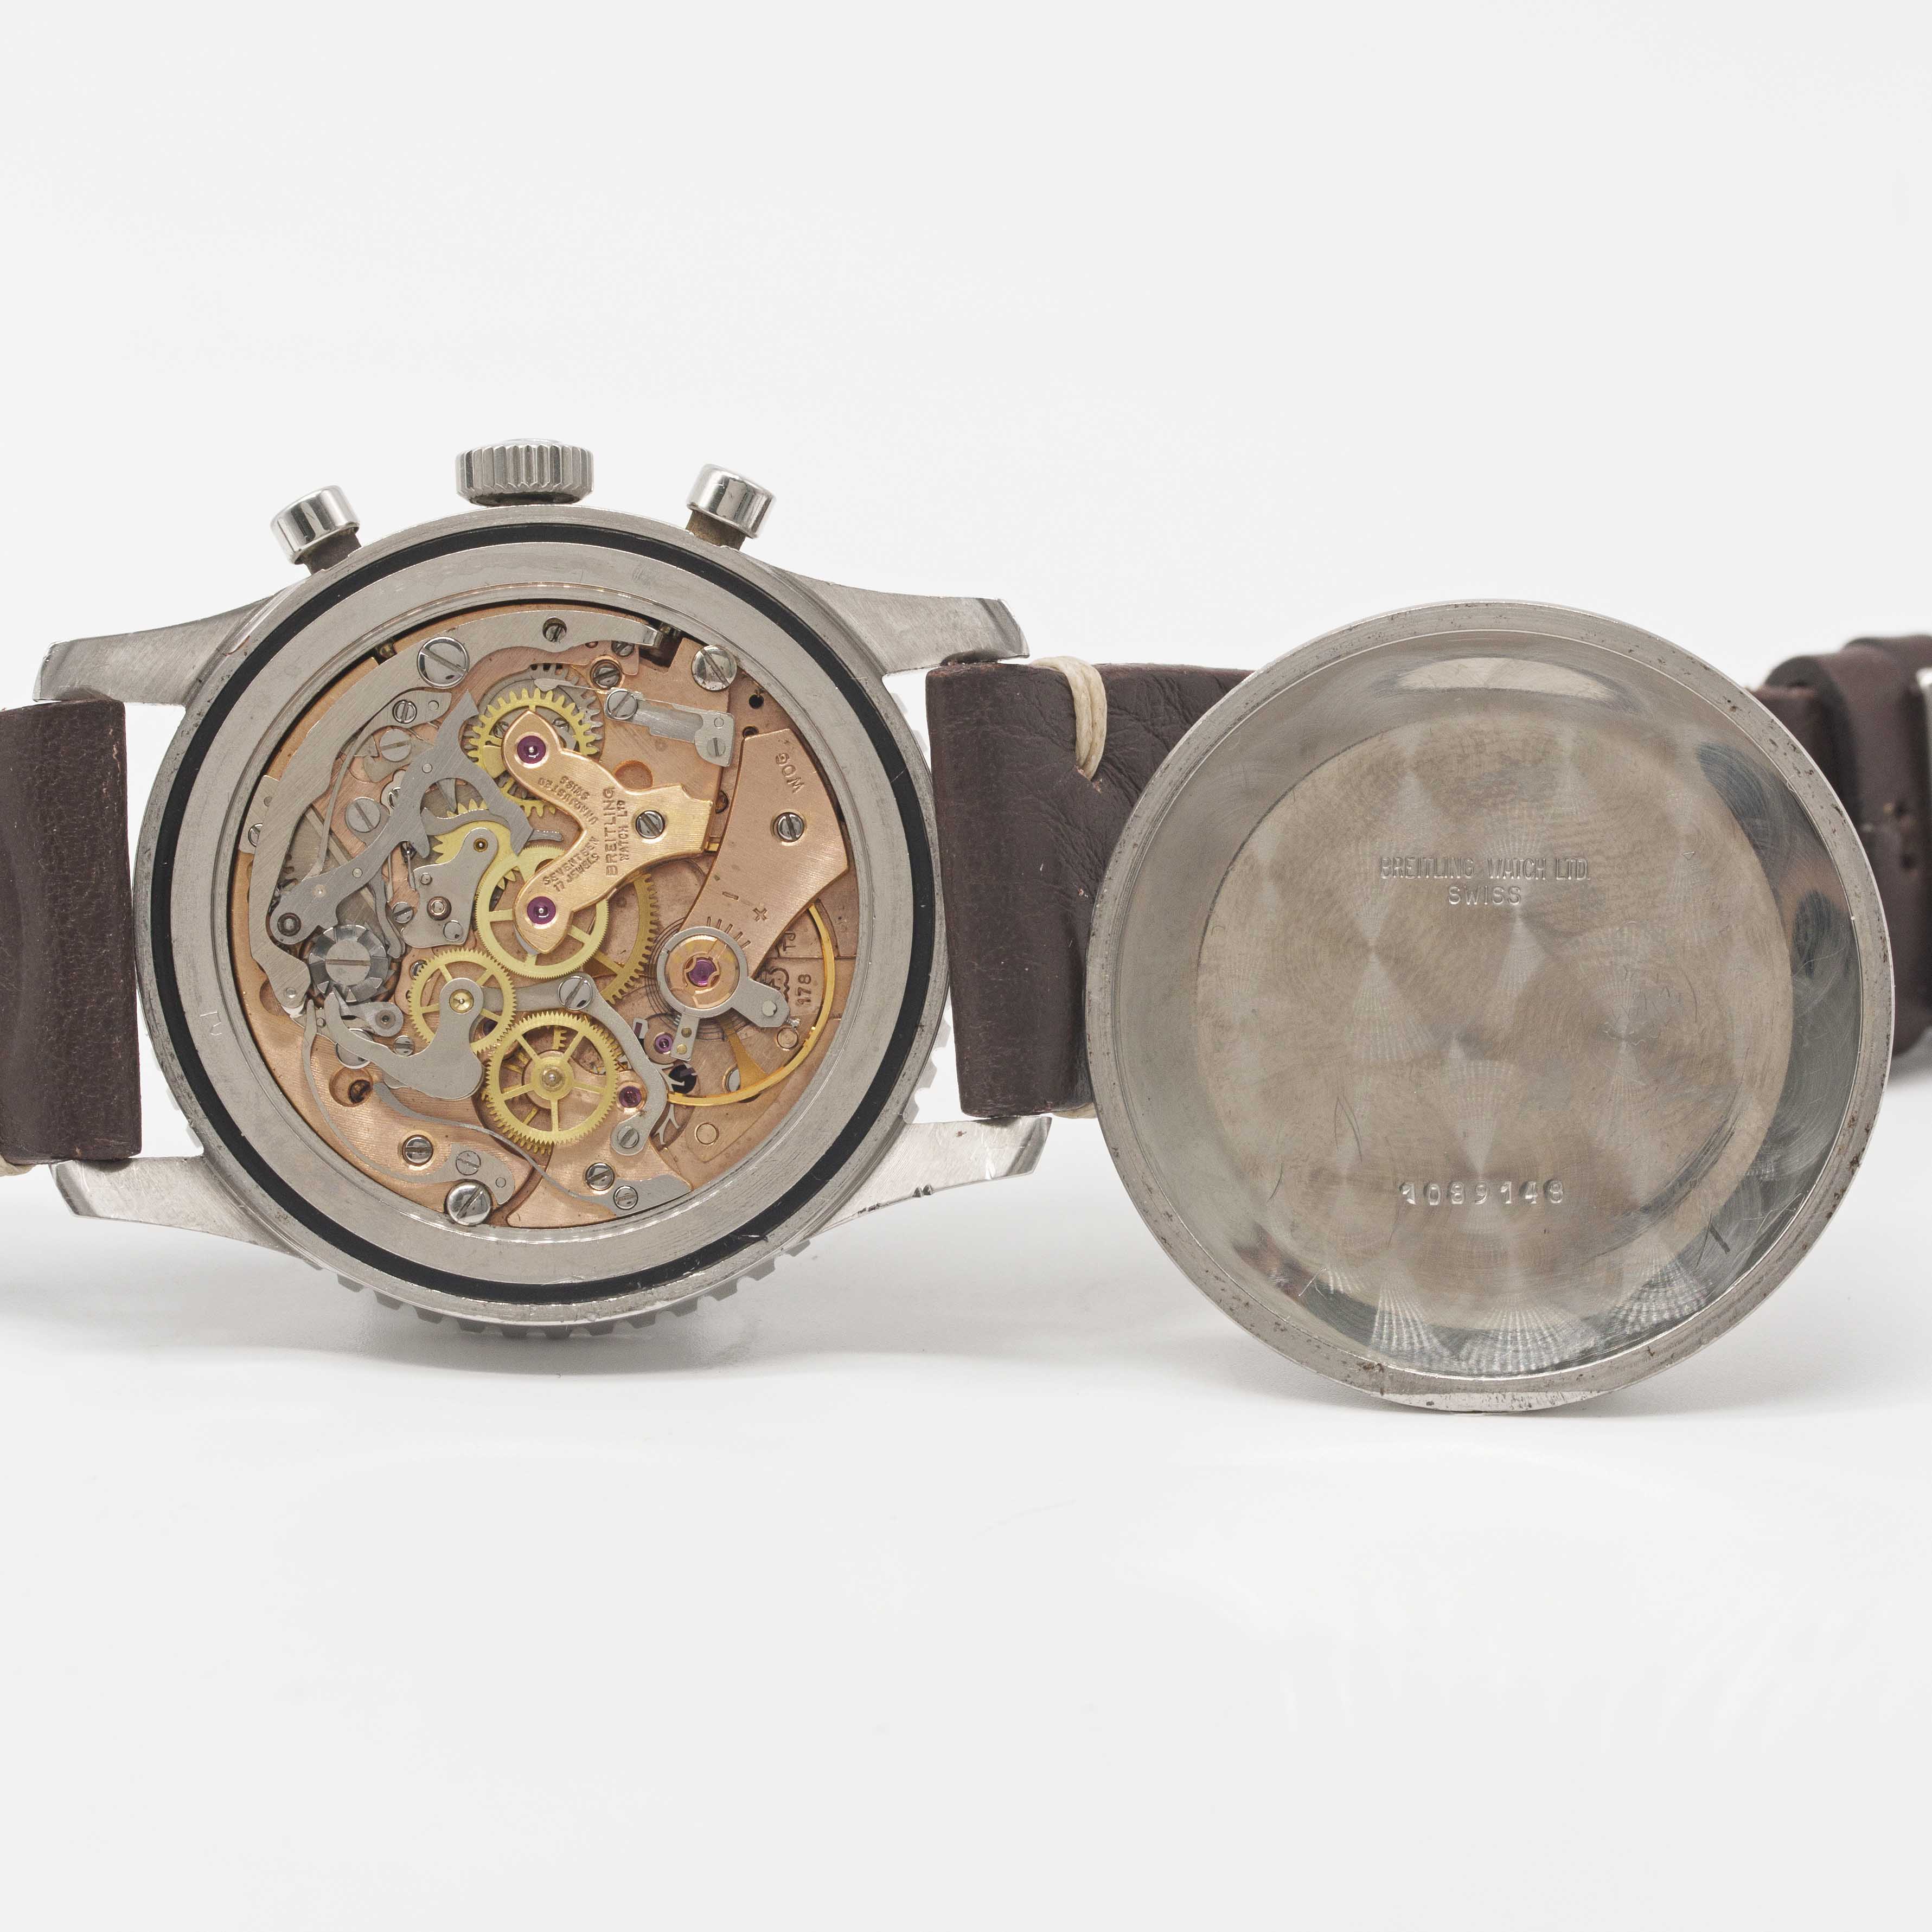 A GENTLEMAN'S STAINLESS STEEL BREITLING NAVITIMER CHRONOGRAPH WRIST WATCH CIRCA 1966, REF. 806 - Image 7 of 9